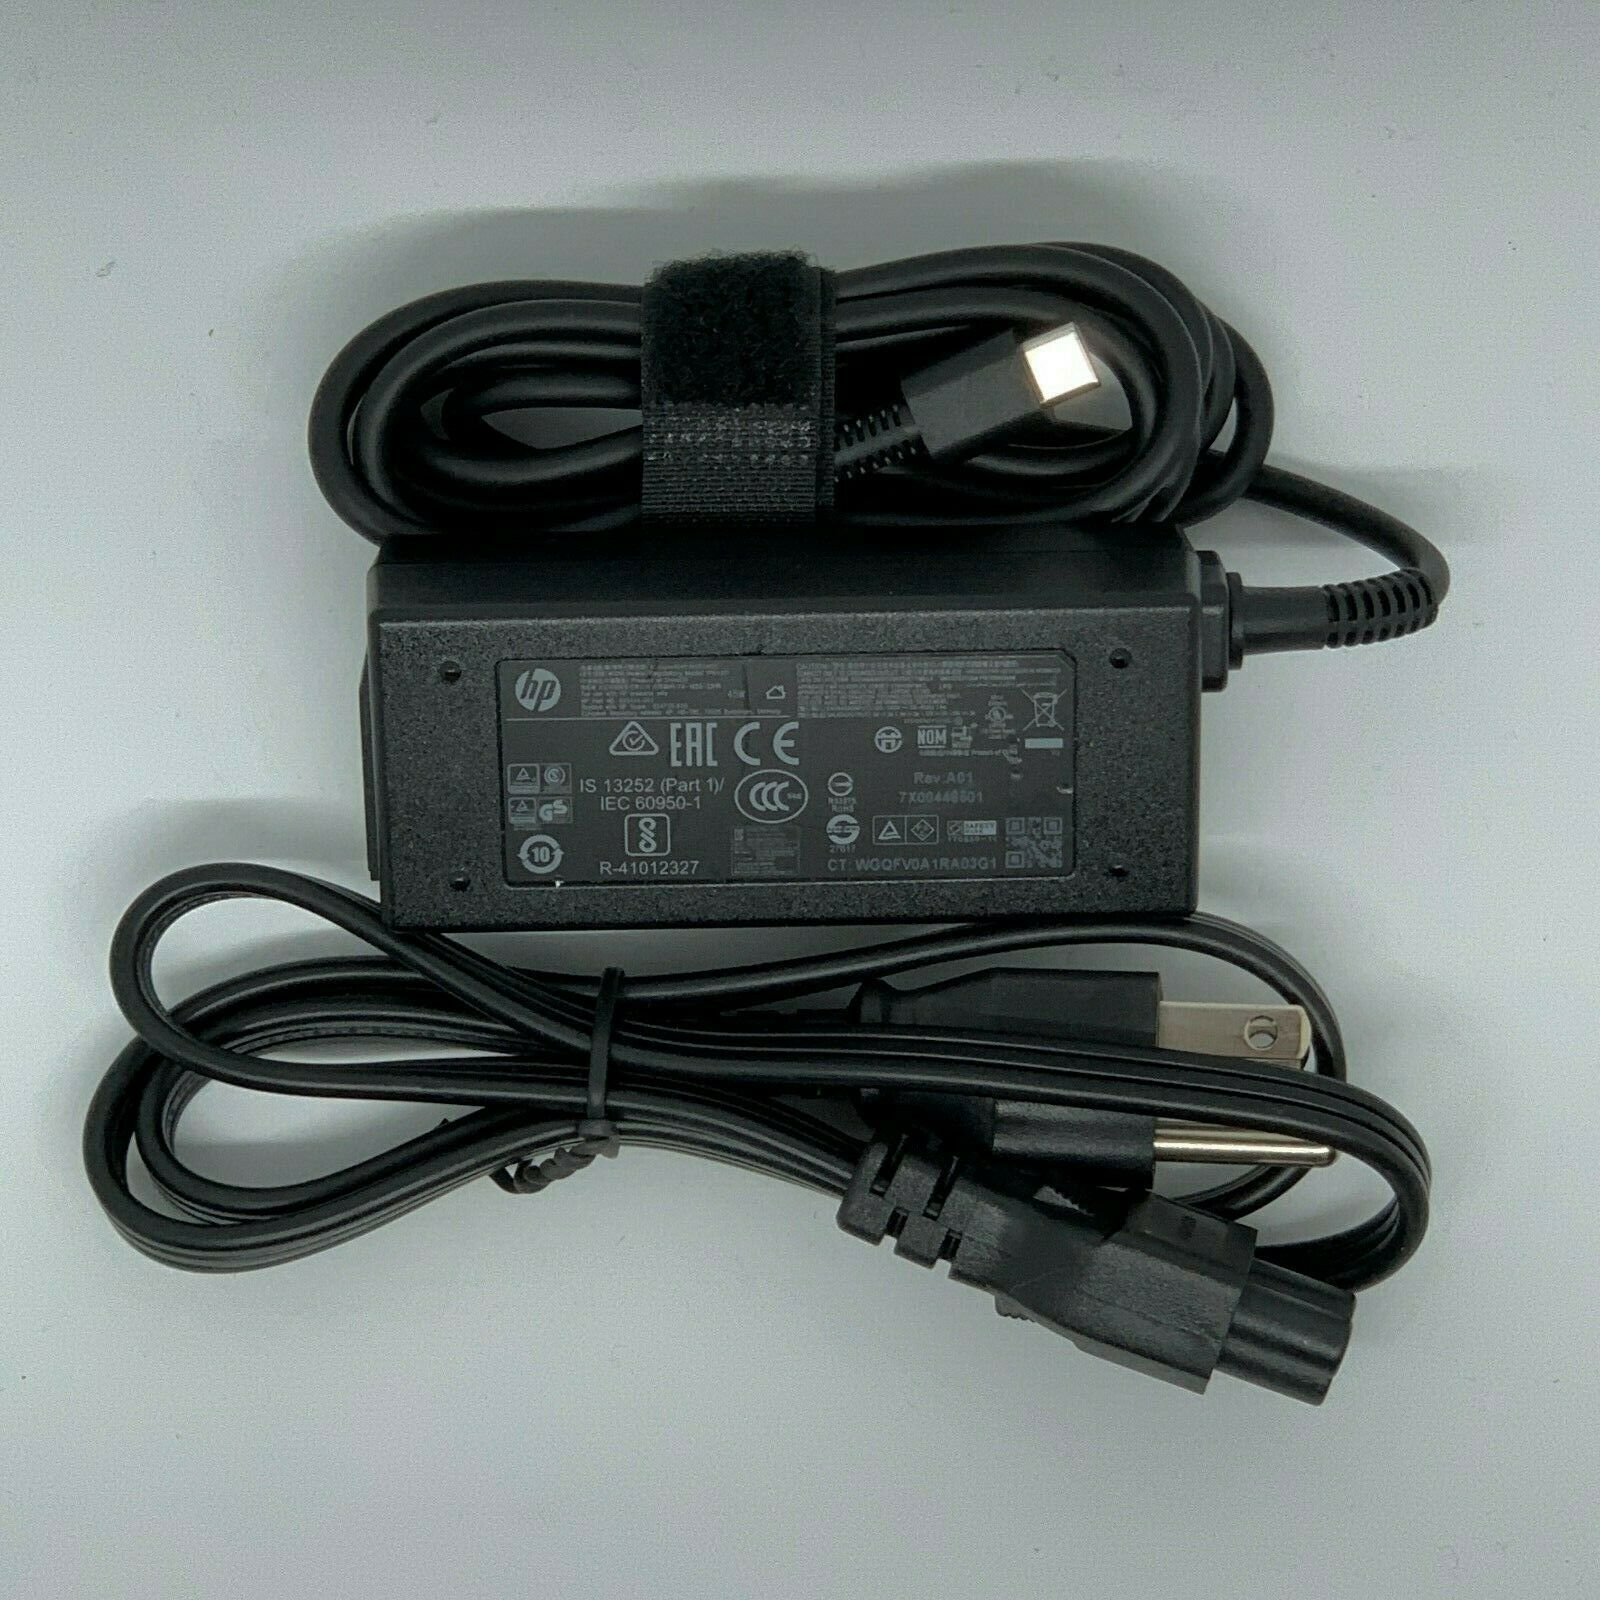 HP ELITE X2 1012 G1 TABLET 45w Charger AC Power Adapter NEW Genuine Country/Region of Manufacture: China Compatible Br